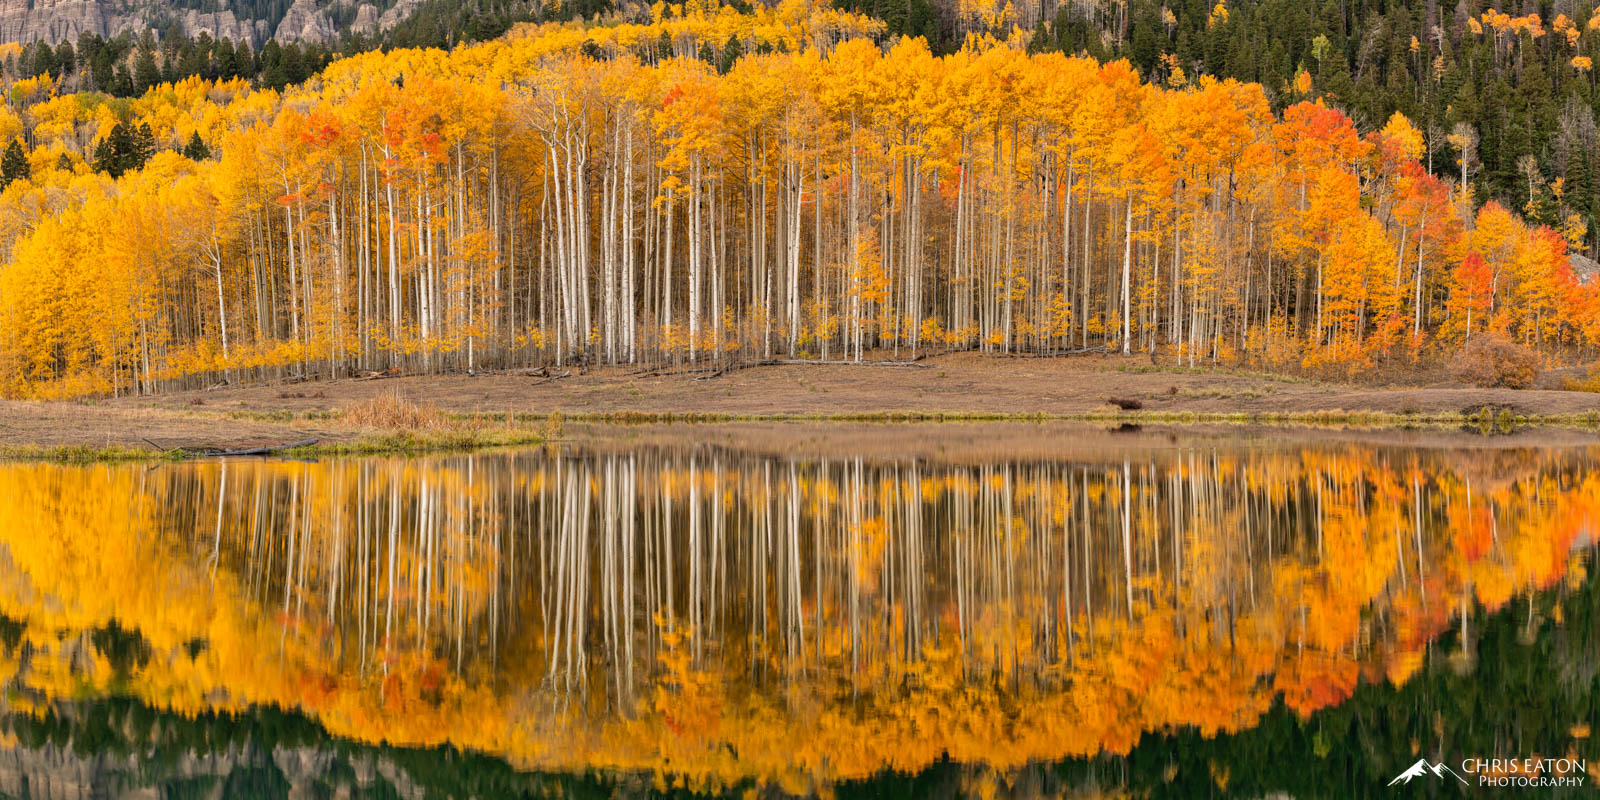 A stand of fall color aspen trees reflected in a high mountain lake.